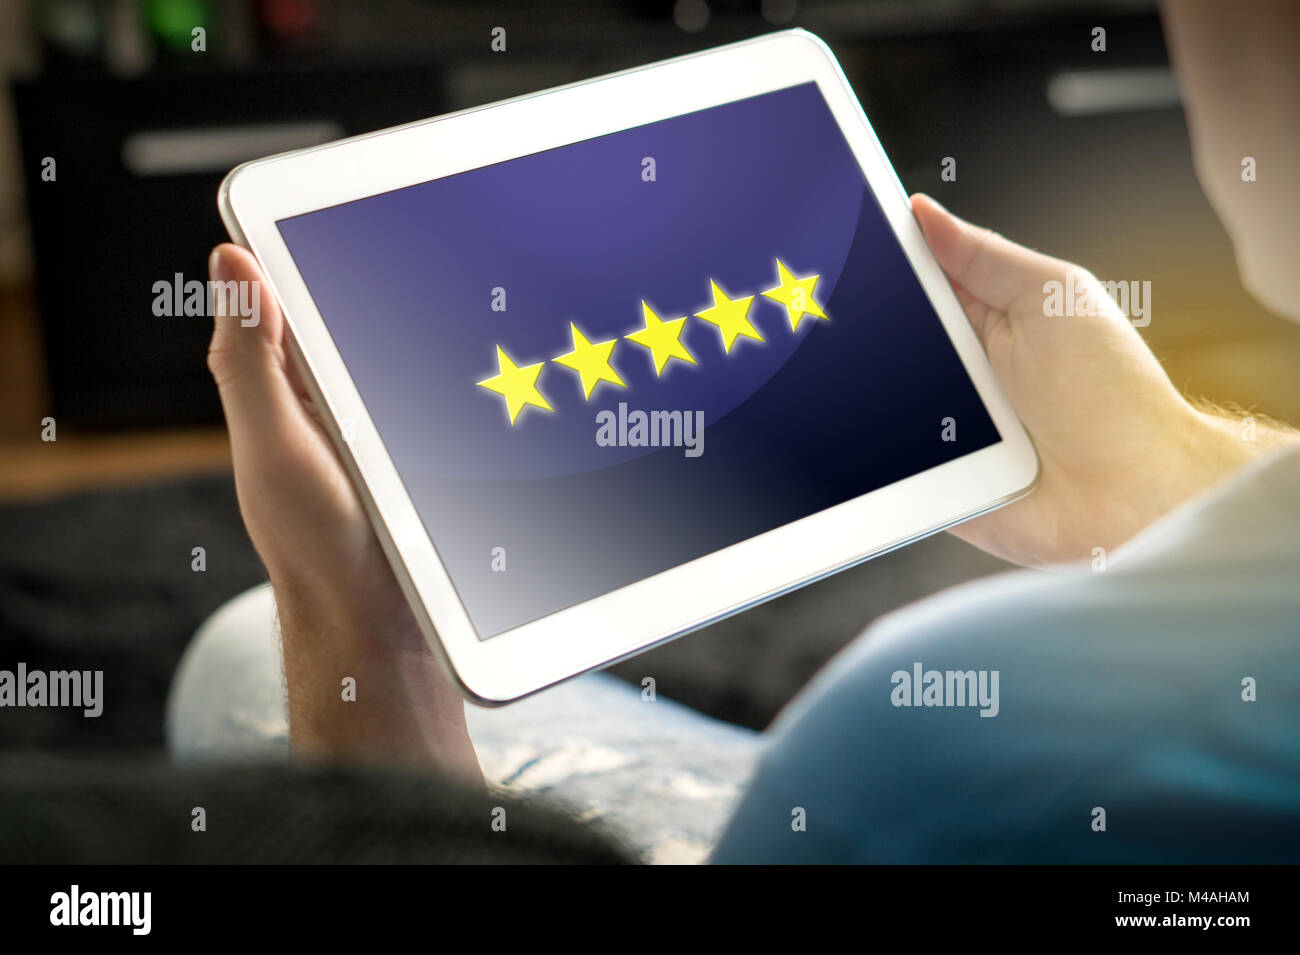 Five star rating and review from satisfied and happy customer and reviewer. Man holding tablet with an imaginary criticism application, social media. Stock Photo